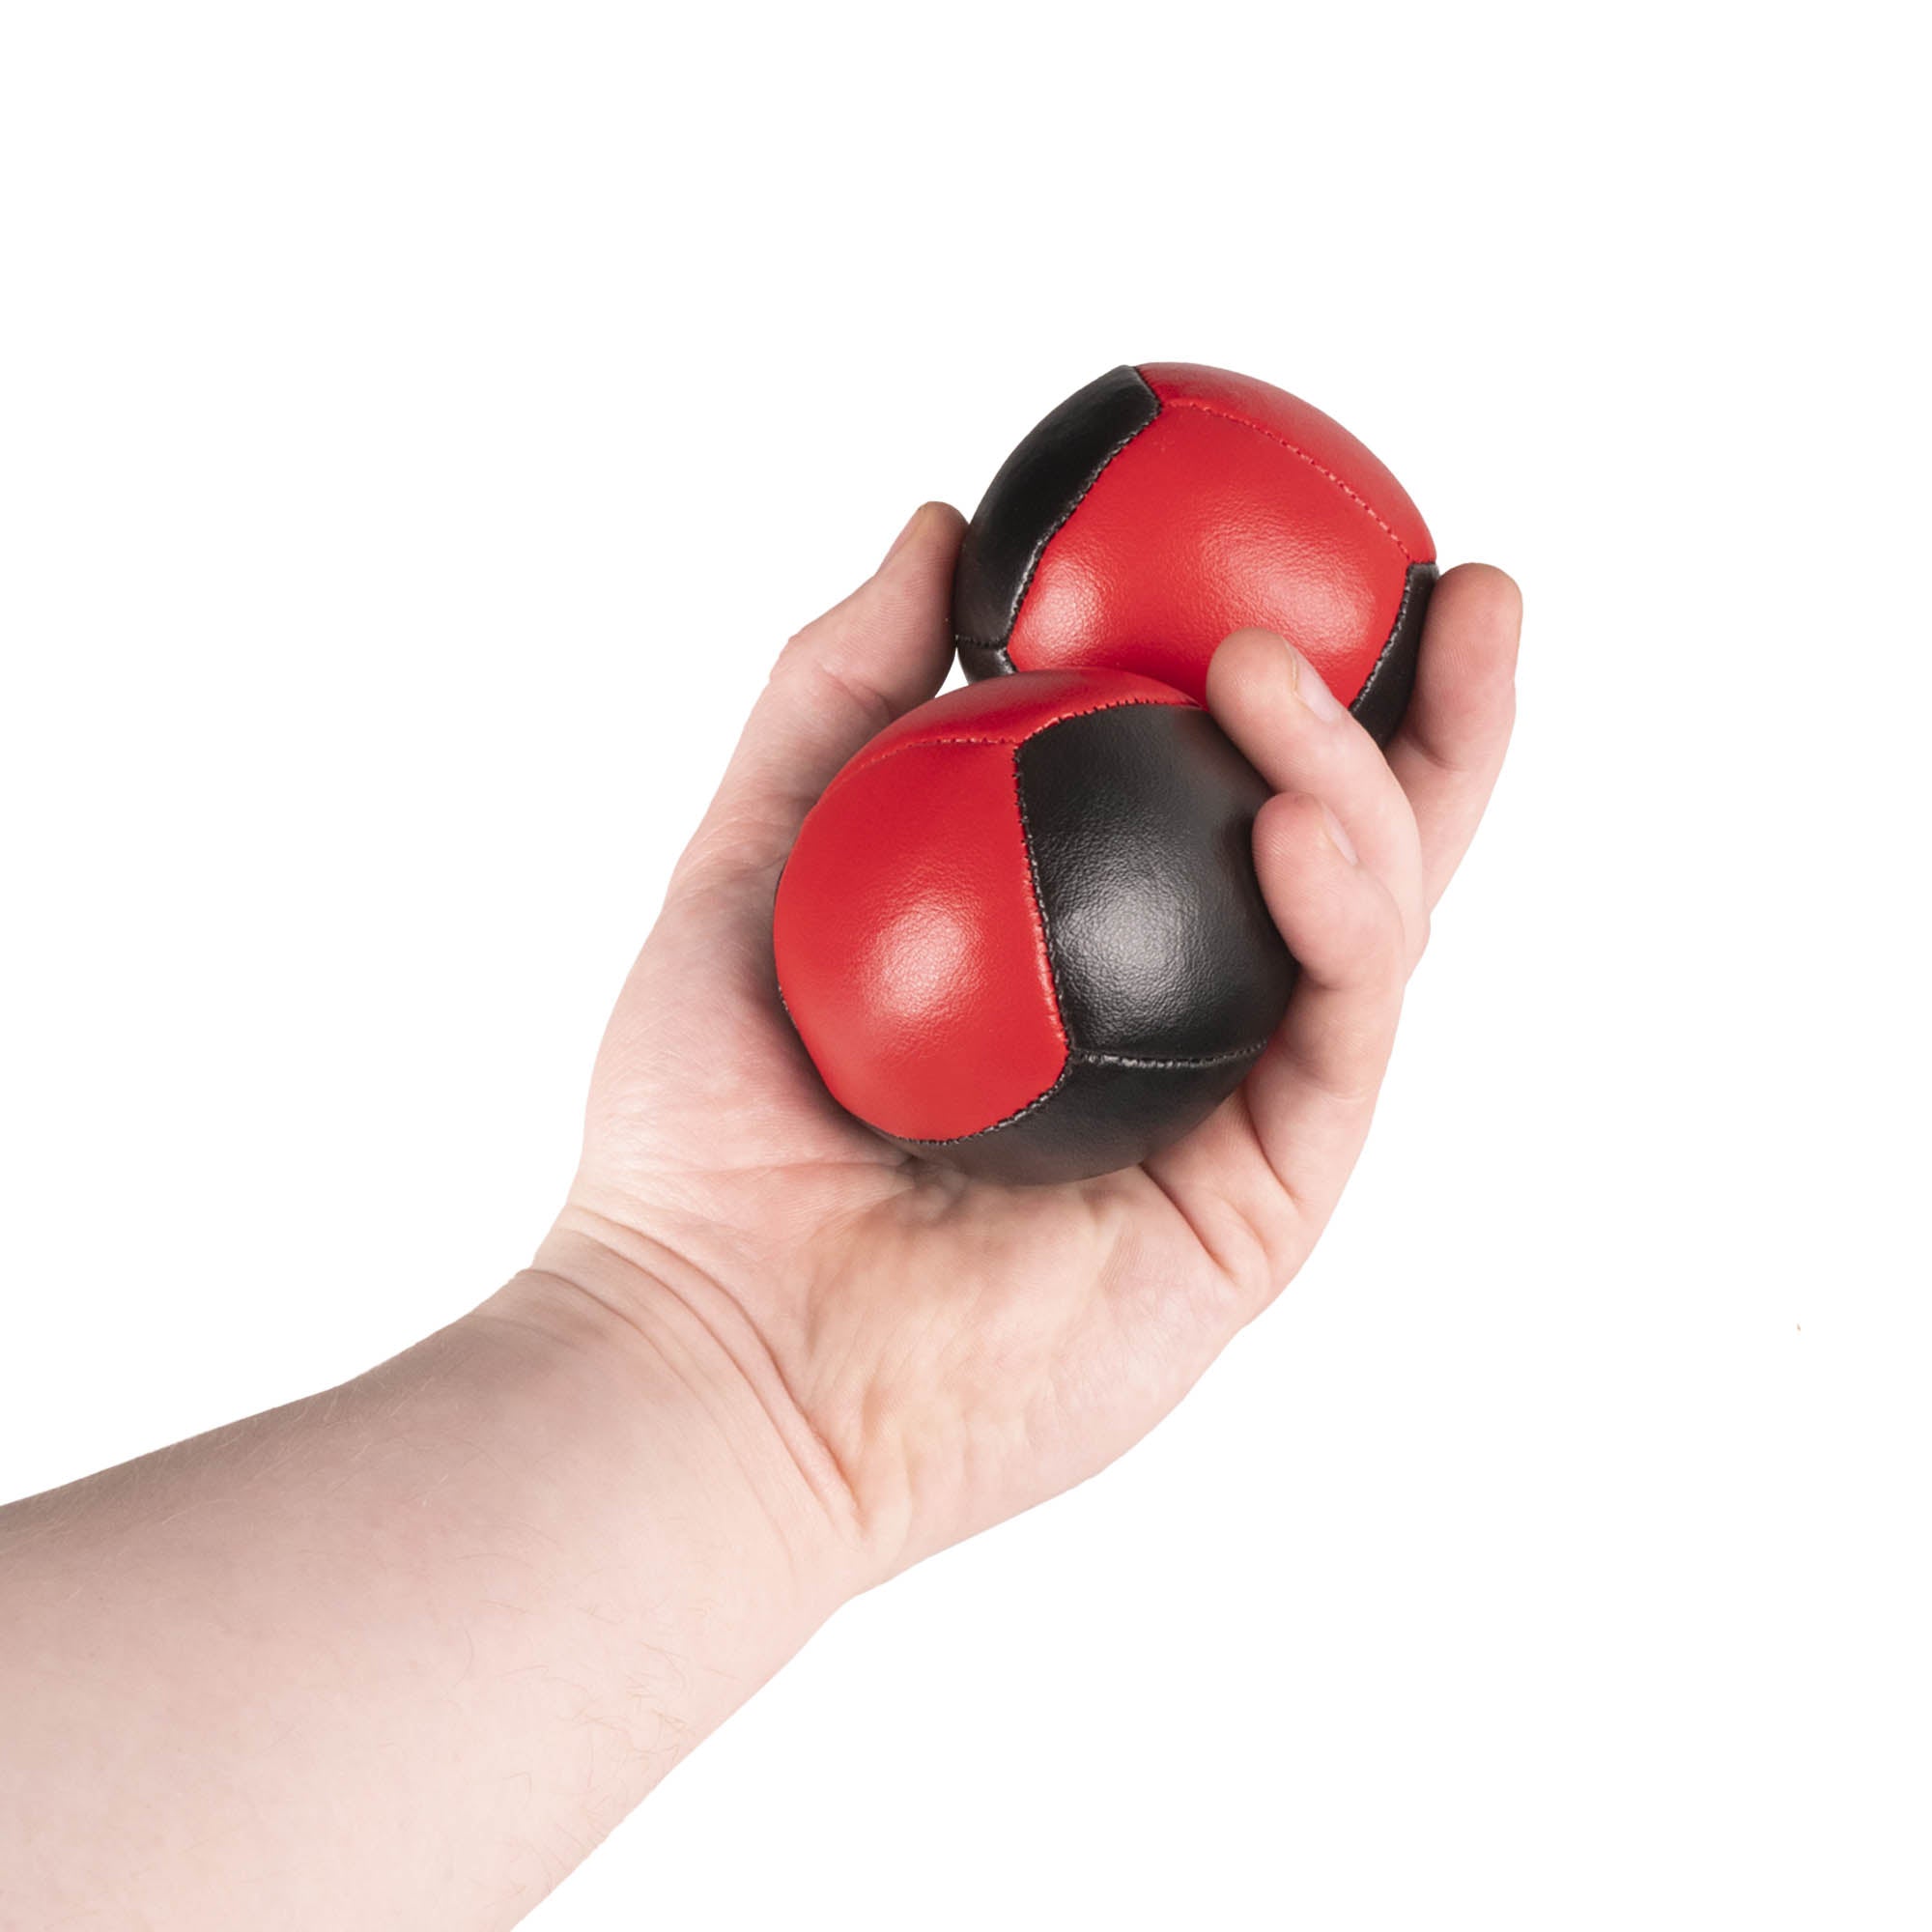 Firetoys two red/black 110g thud juggling balls in hand